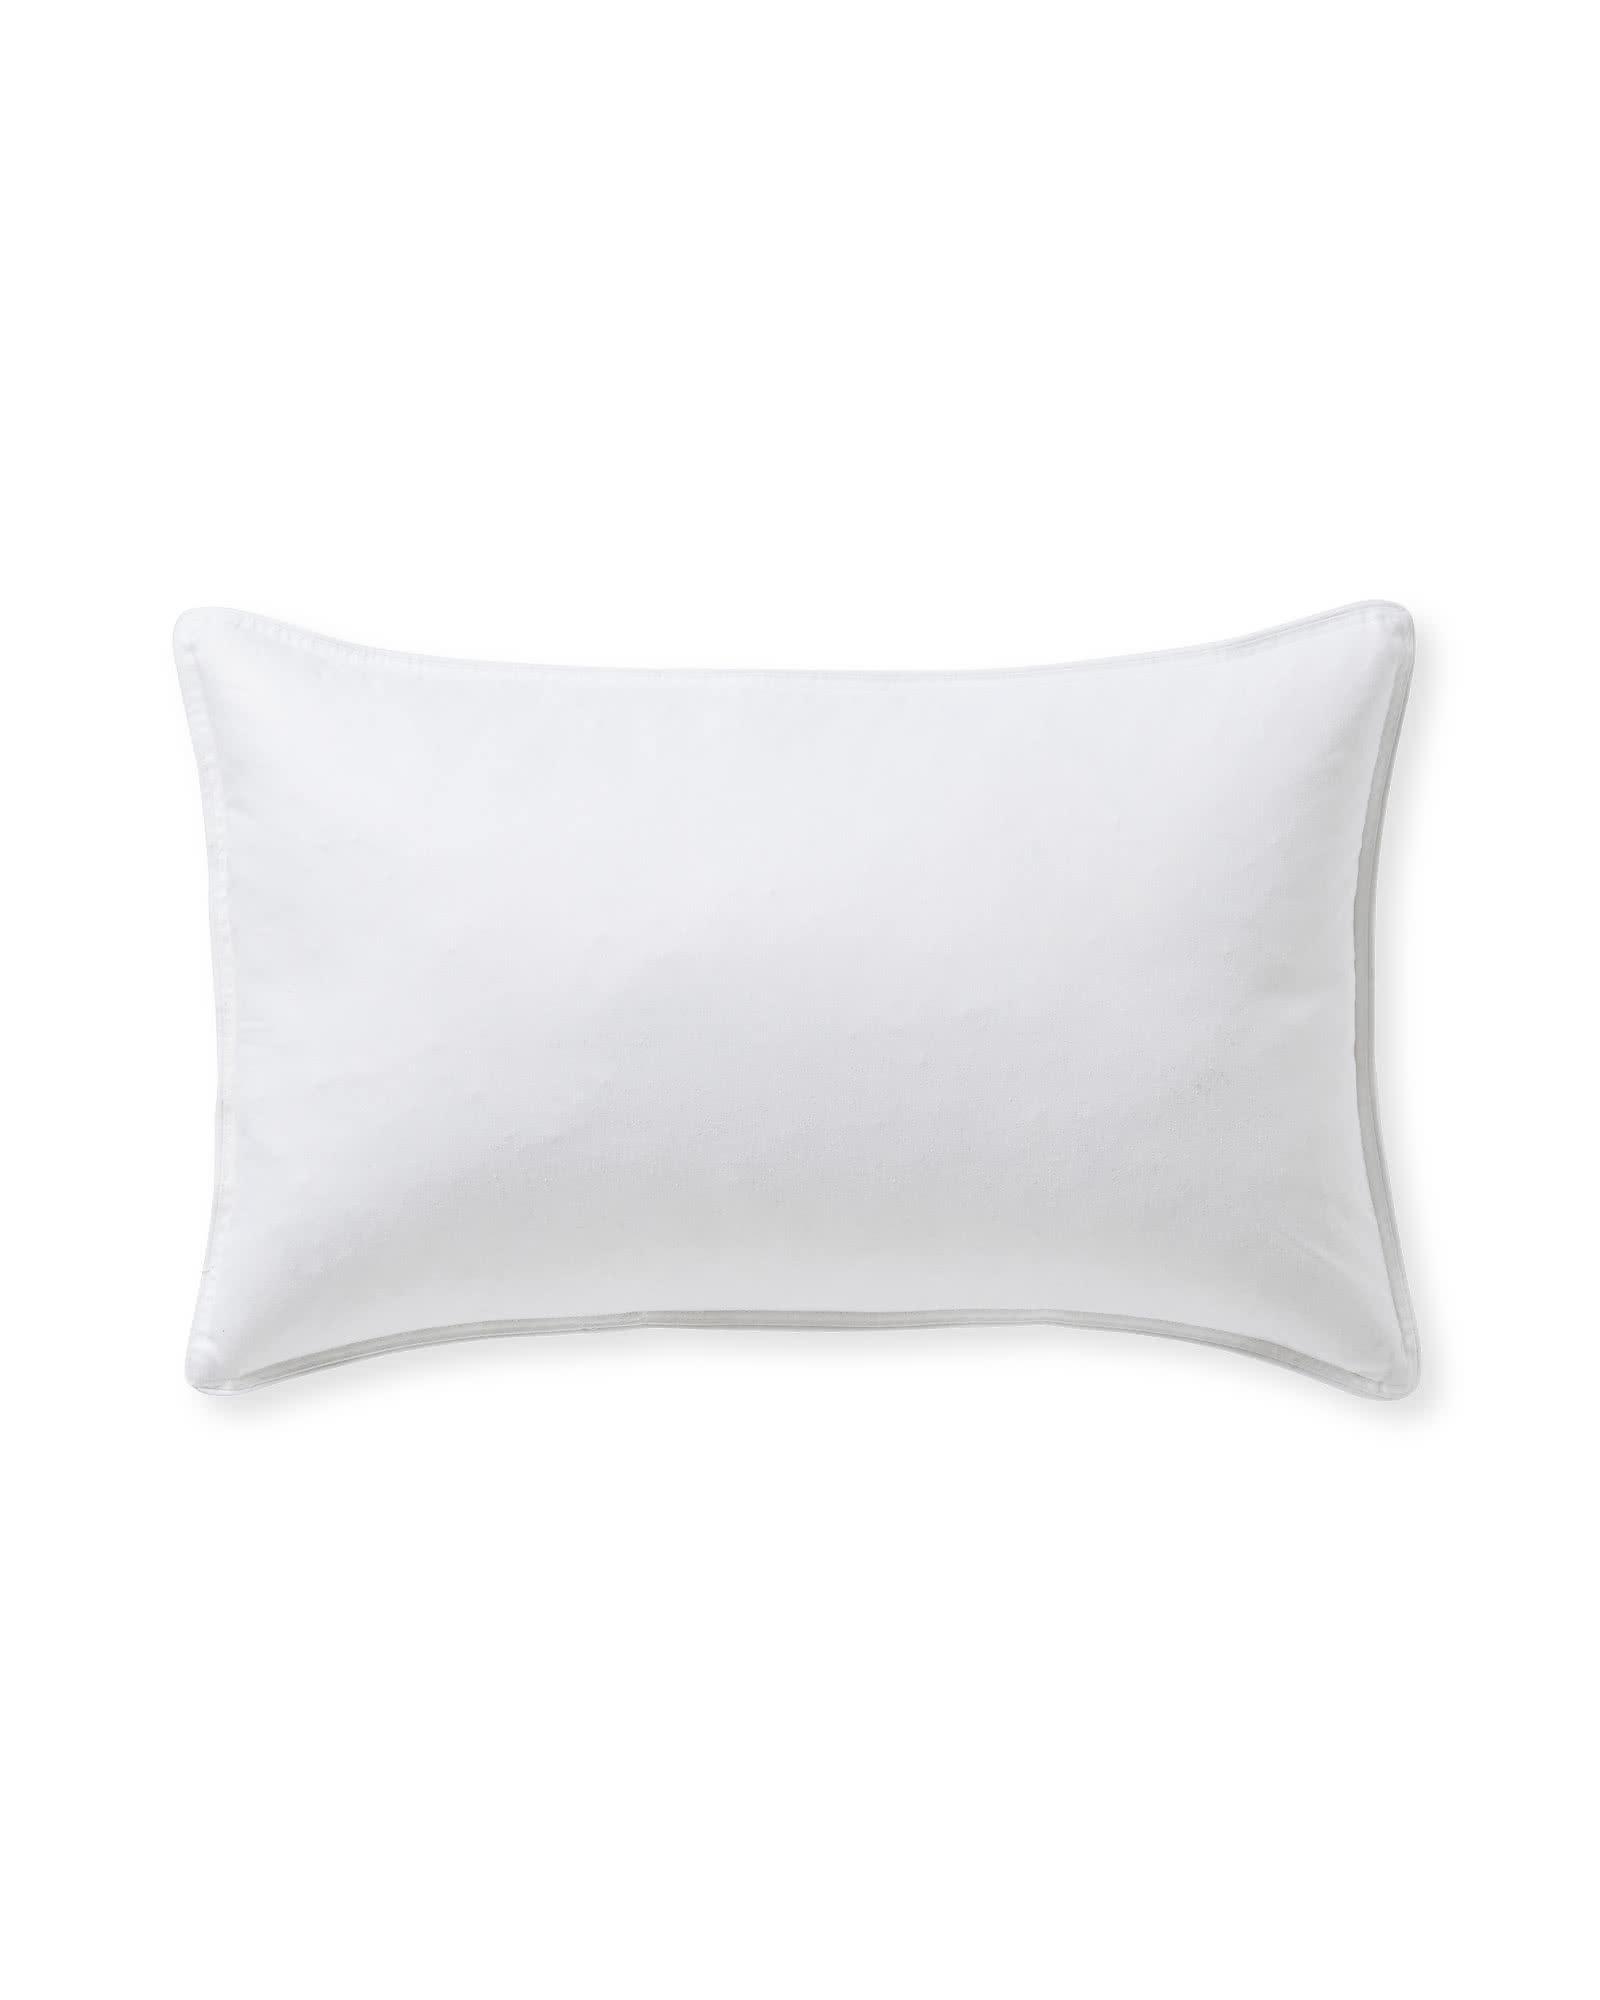 Shop Pillow Insert (SERENA & LILY), Size: 7”x36”, Quantity: 1 from Serena & Lily on Openhaus